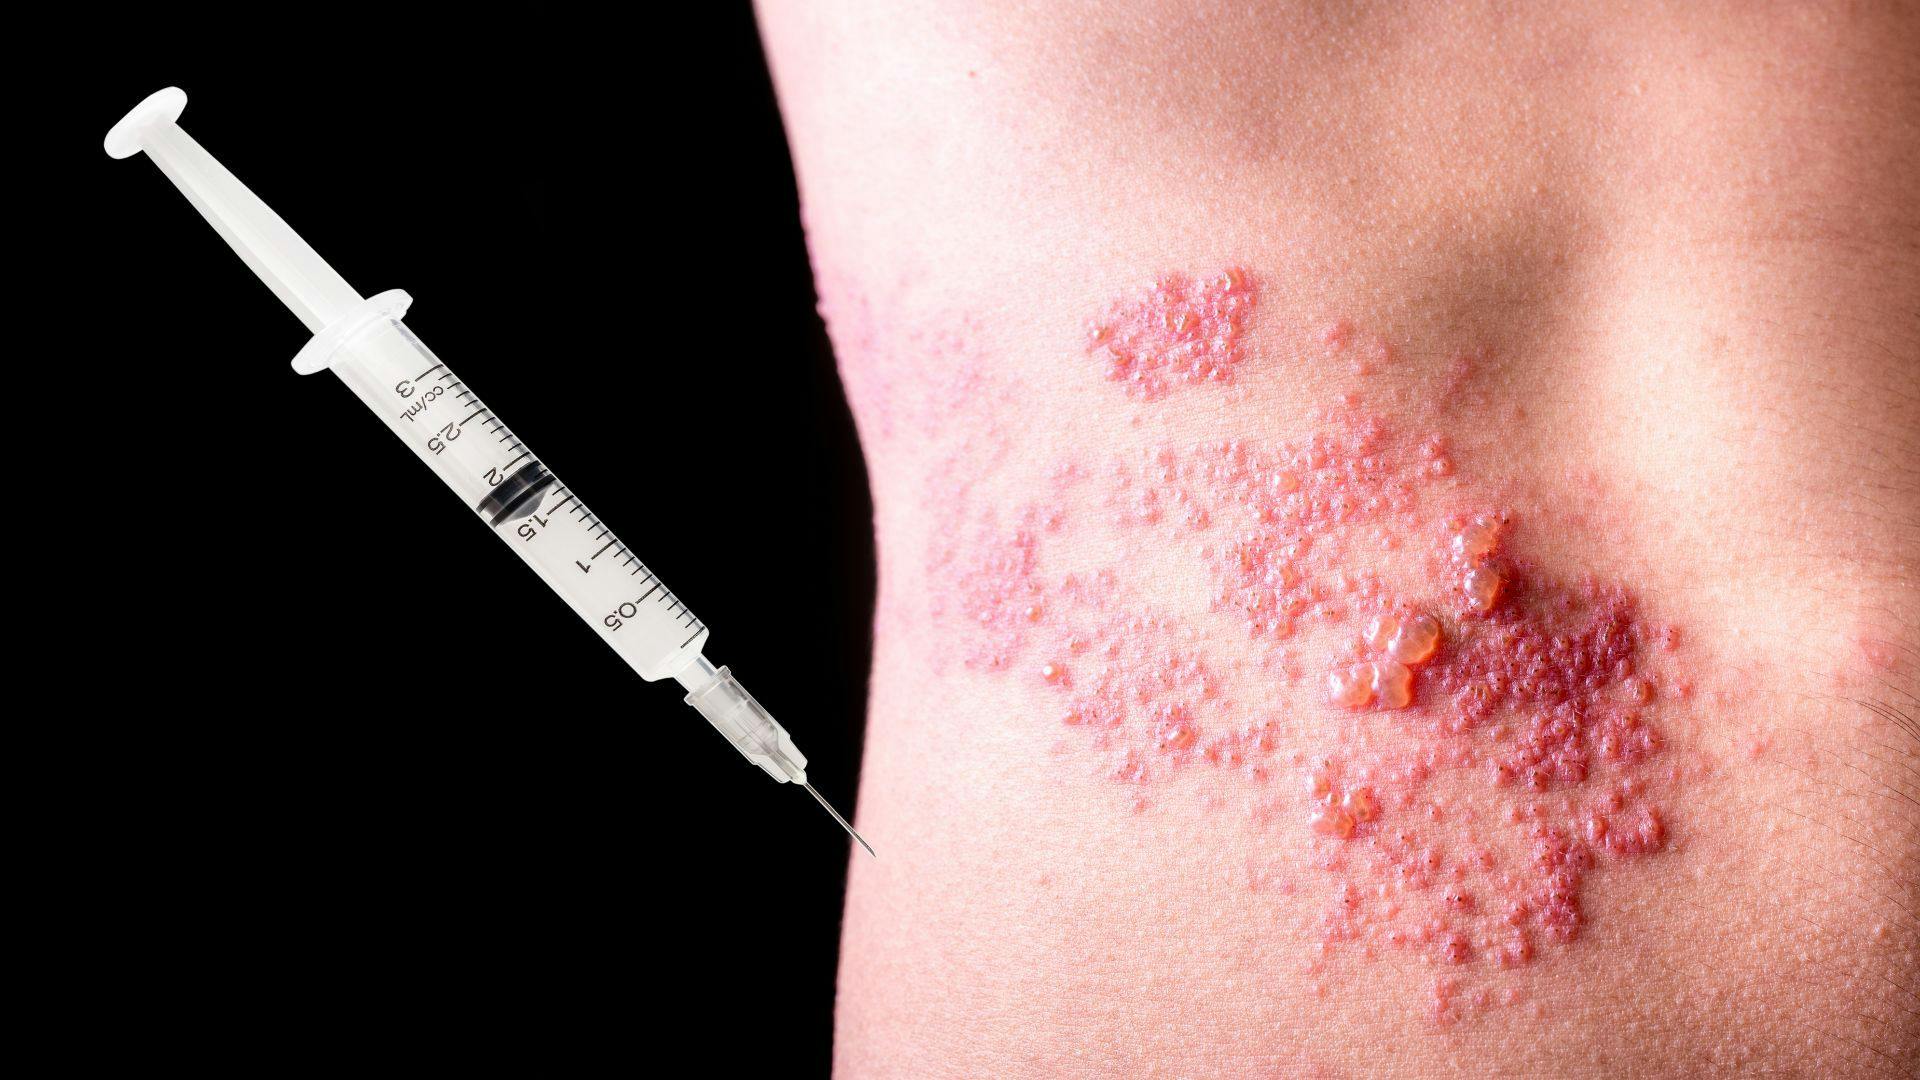 Studies Reveal How Shingles Vaccine Should be Used in Arthritis Patients